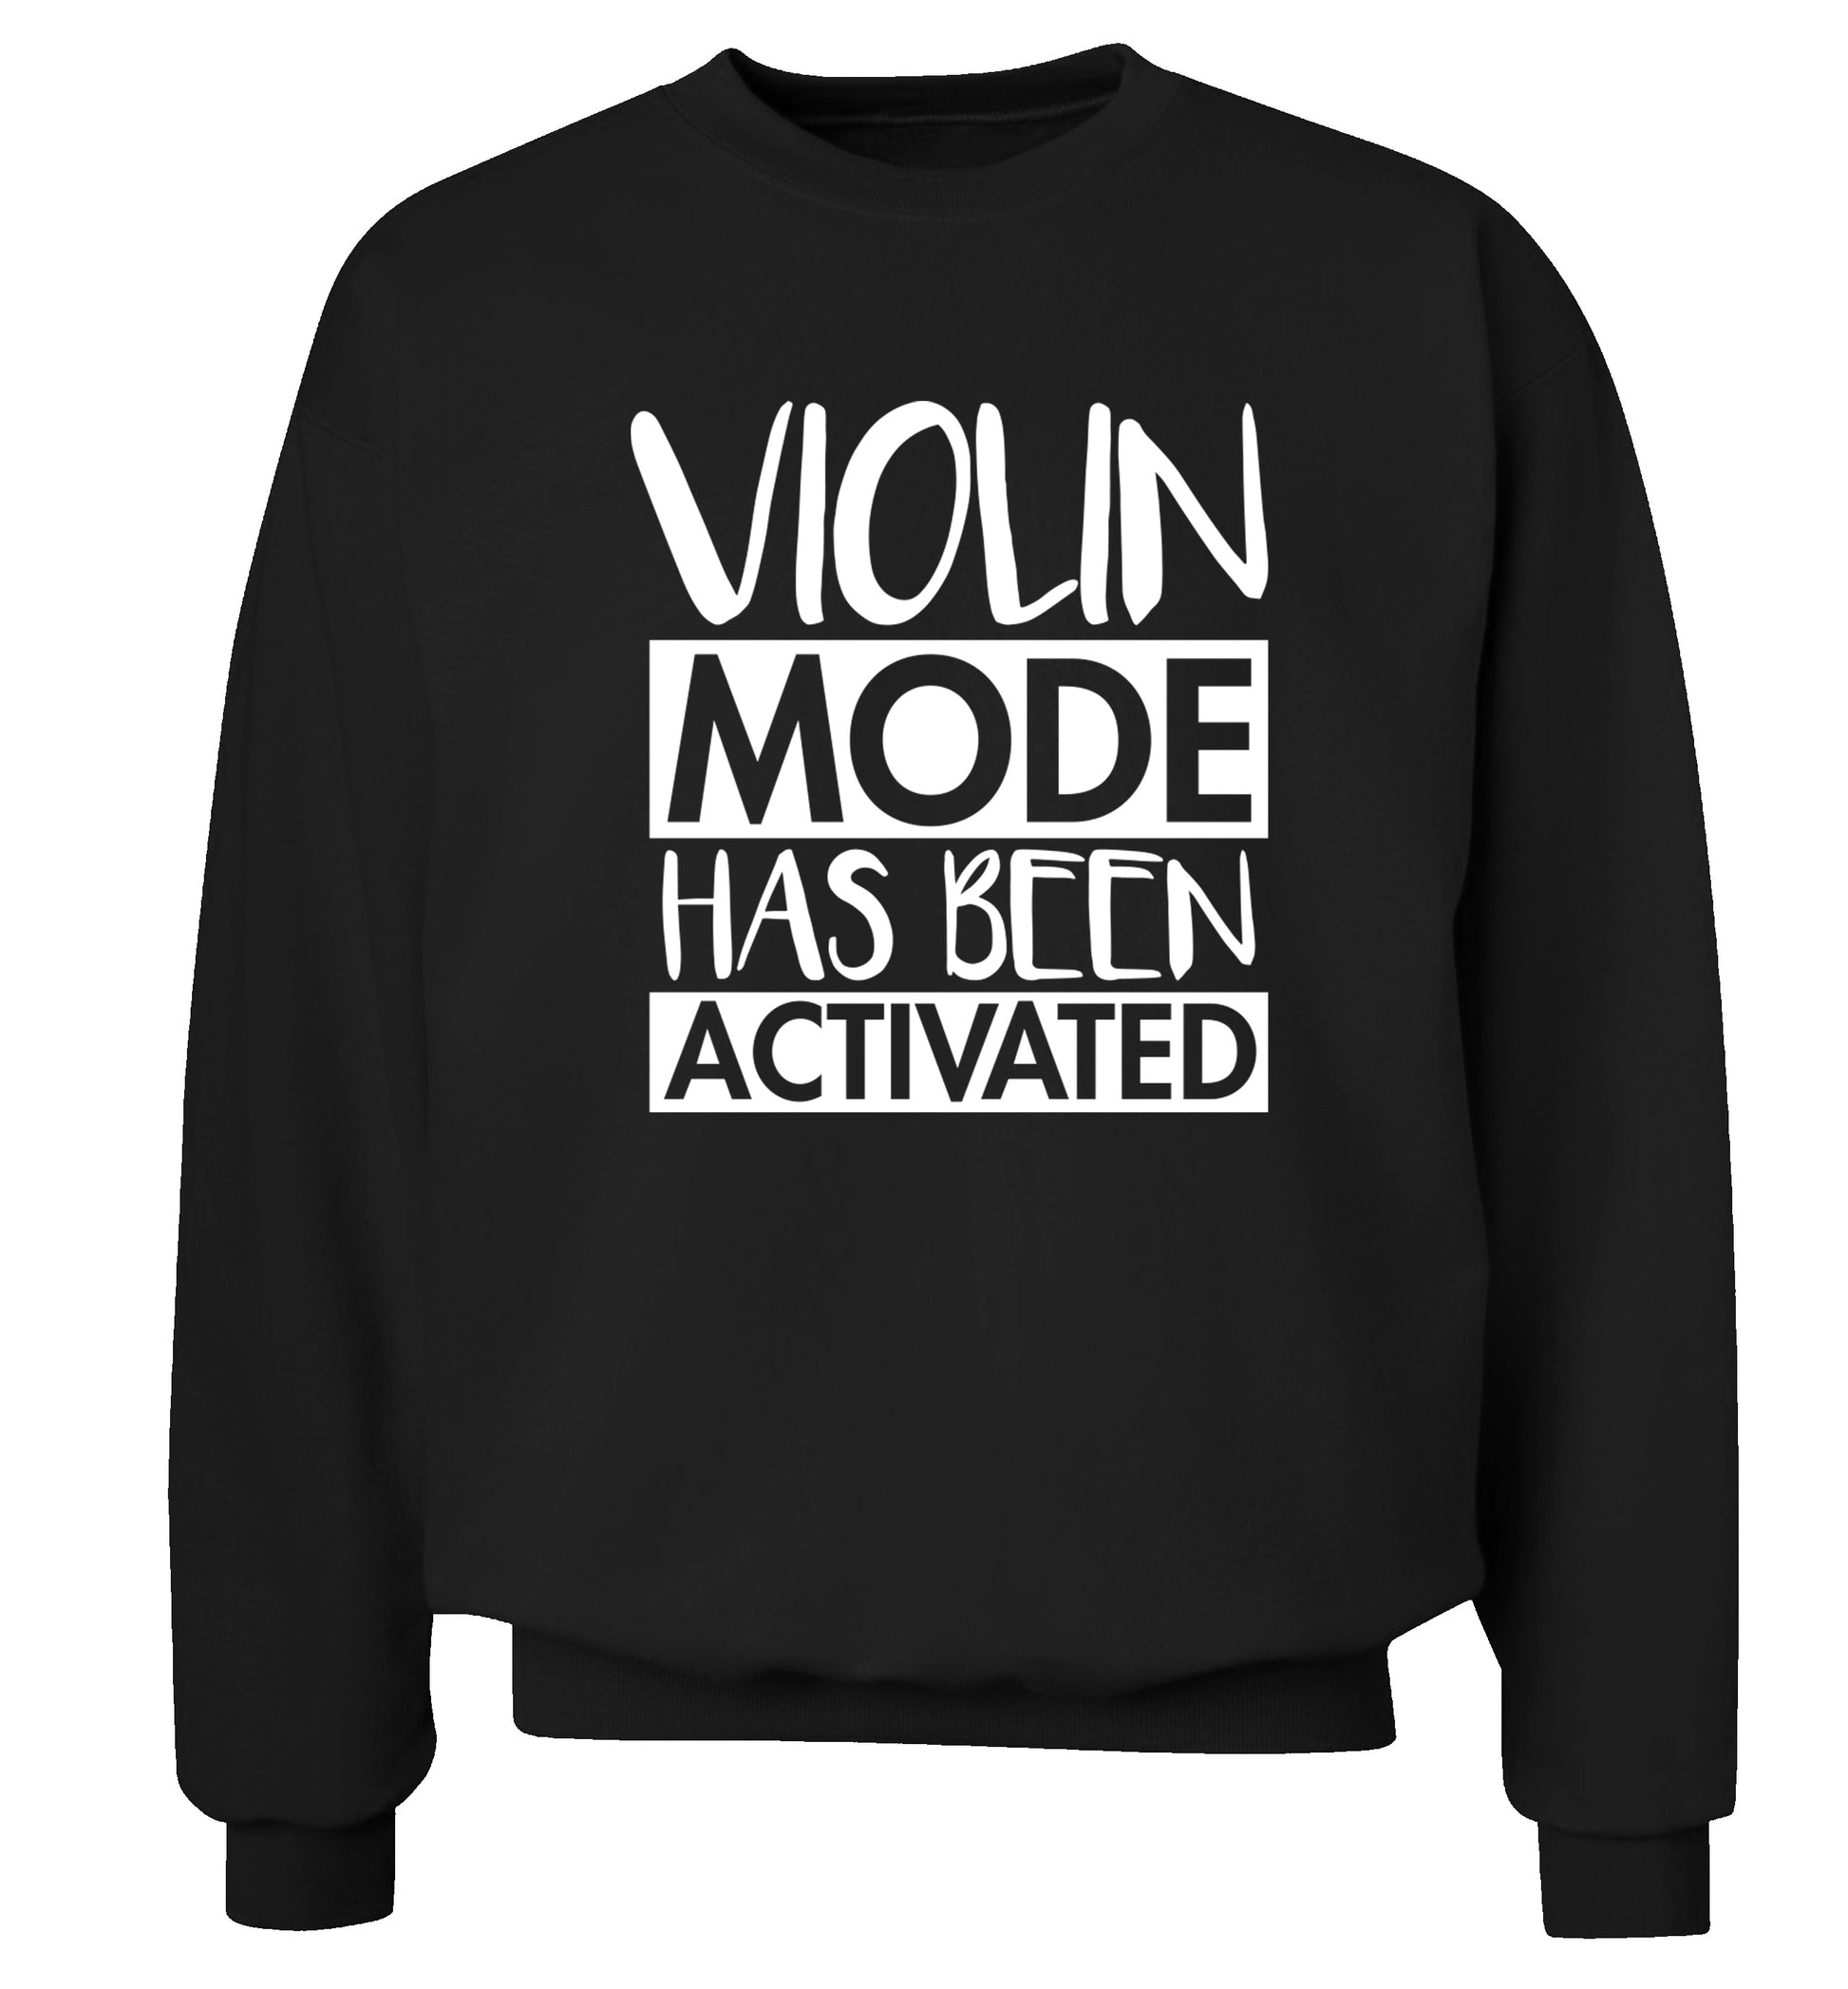 Violin Mode Activated Adult's unisex black Sweater 2XL